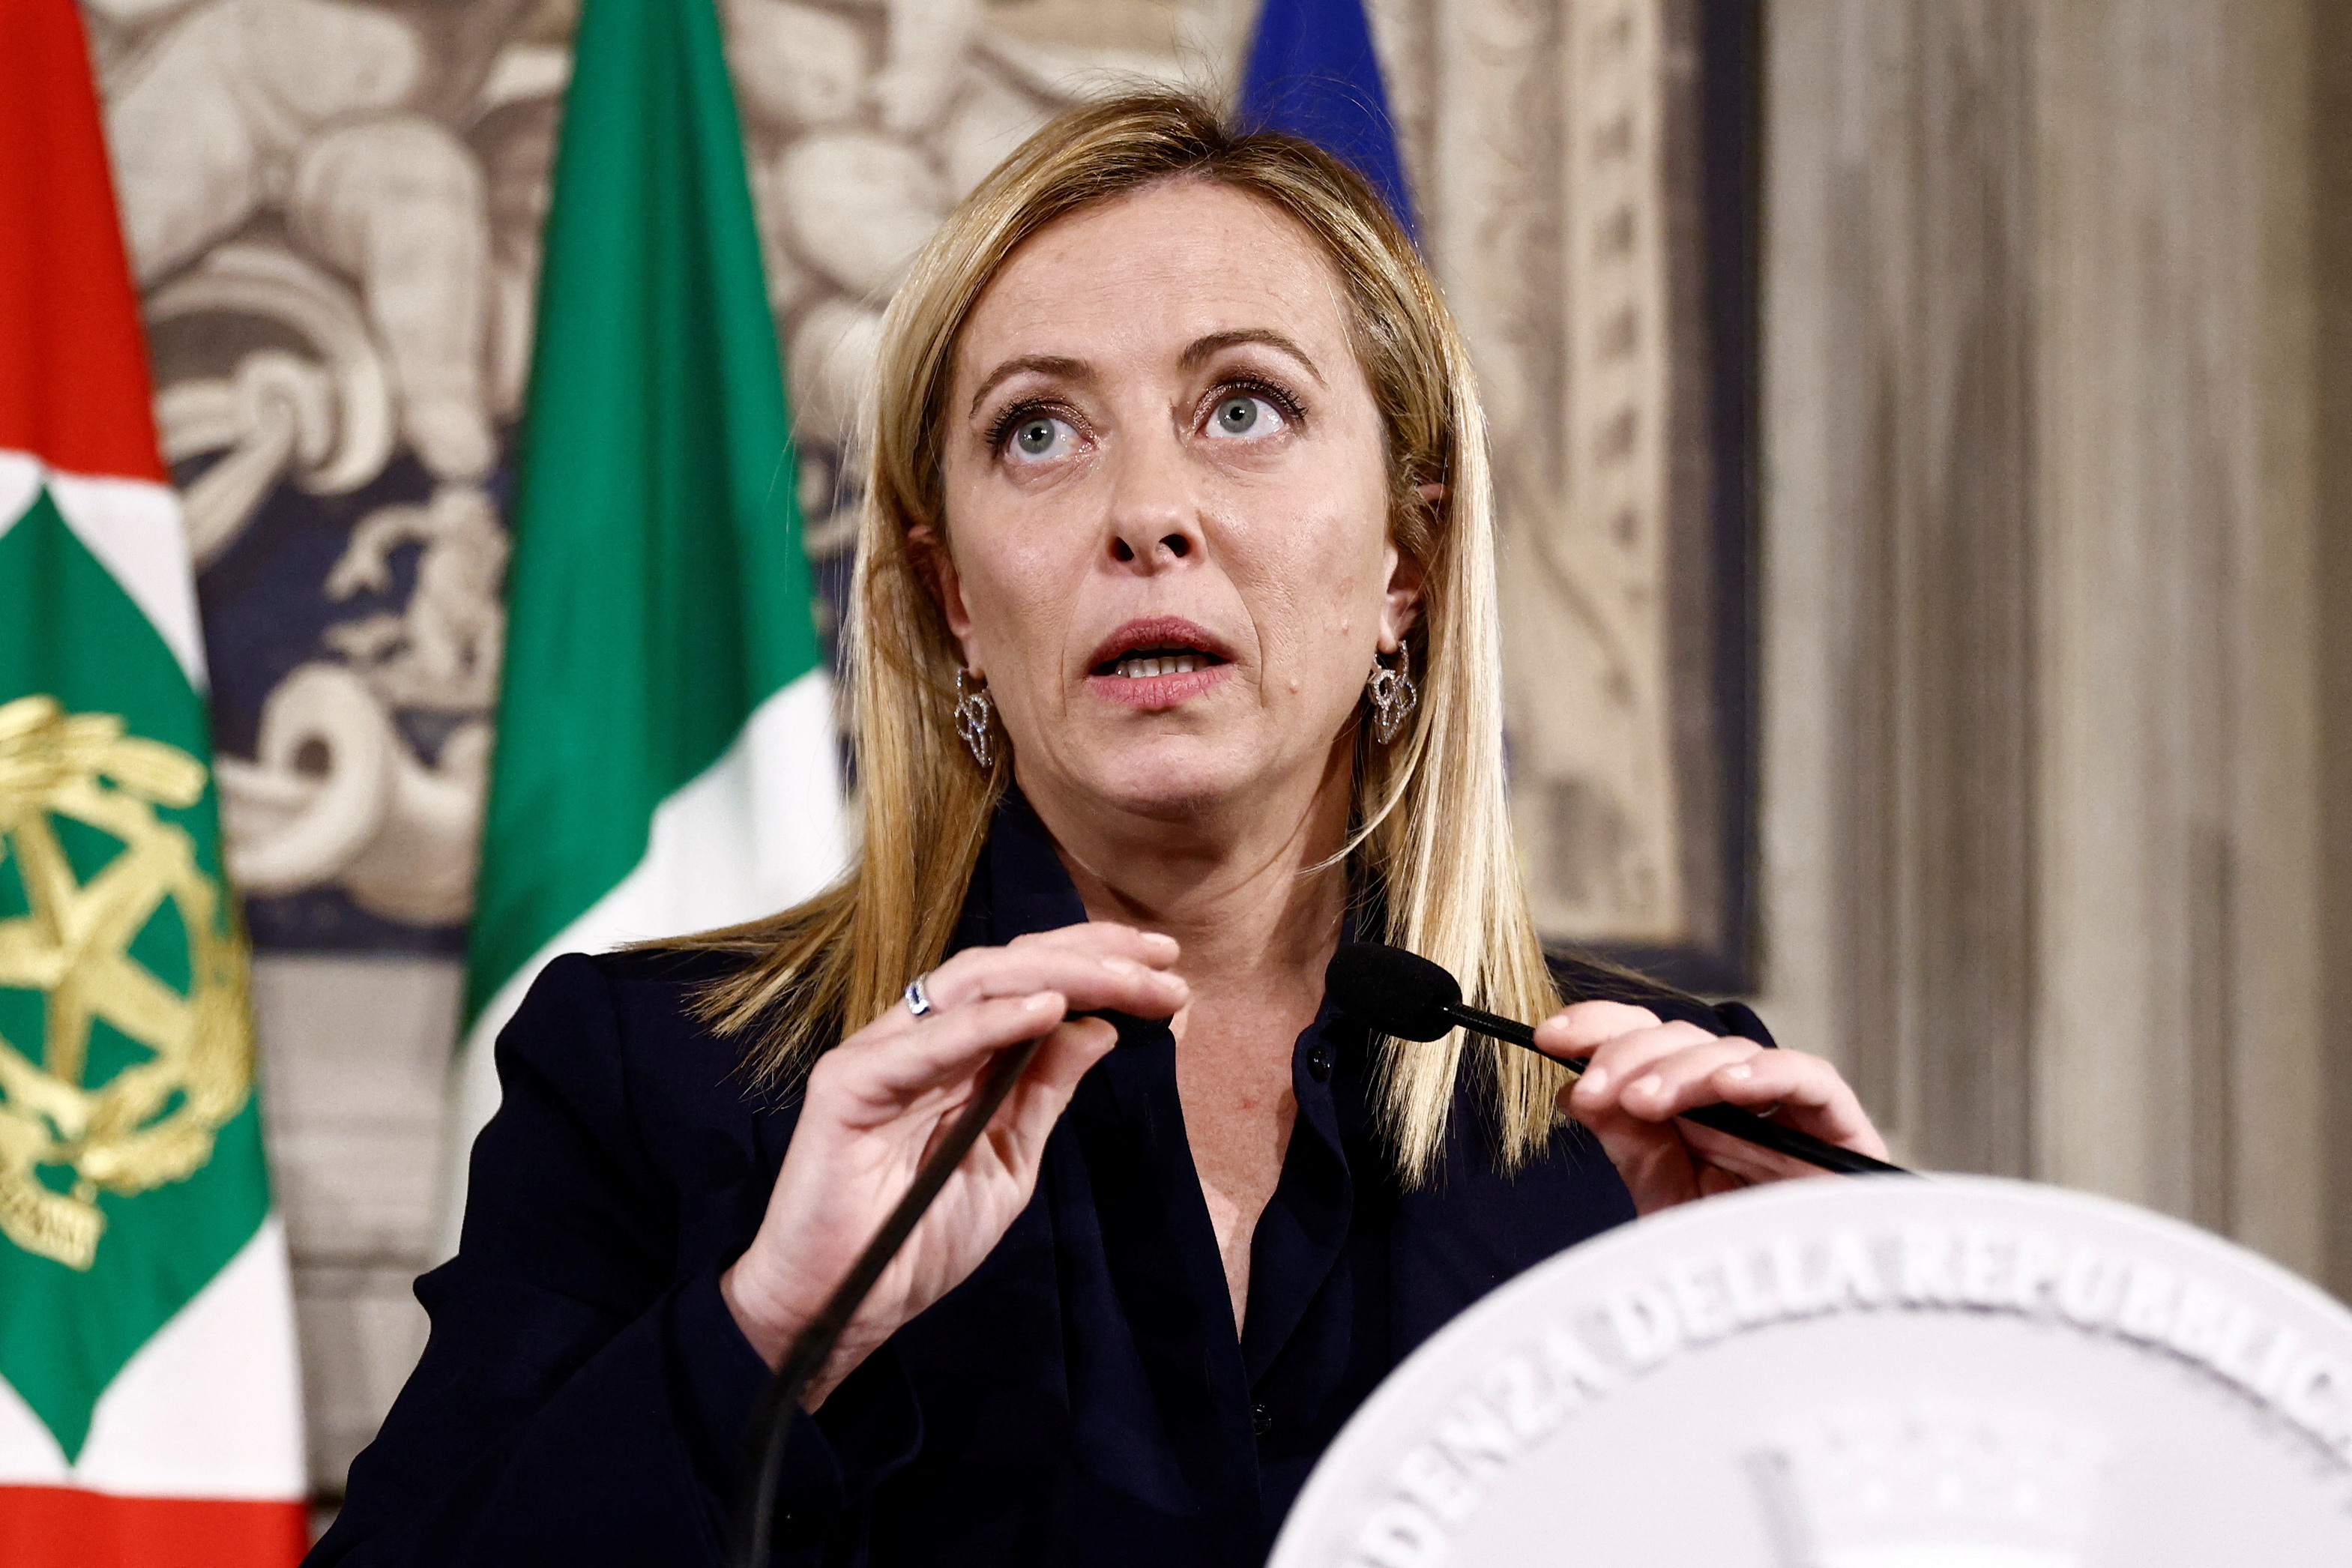 Italy's newly appointed Prime Minister Giorgia Meloni speaks to the media following a meeting with Italian President Sergio Mattarella, in Rome